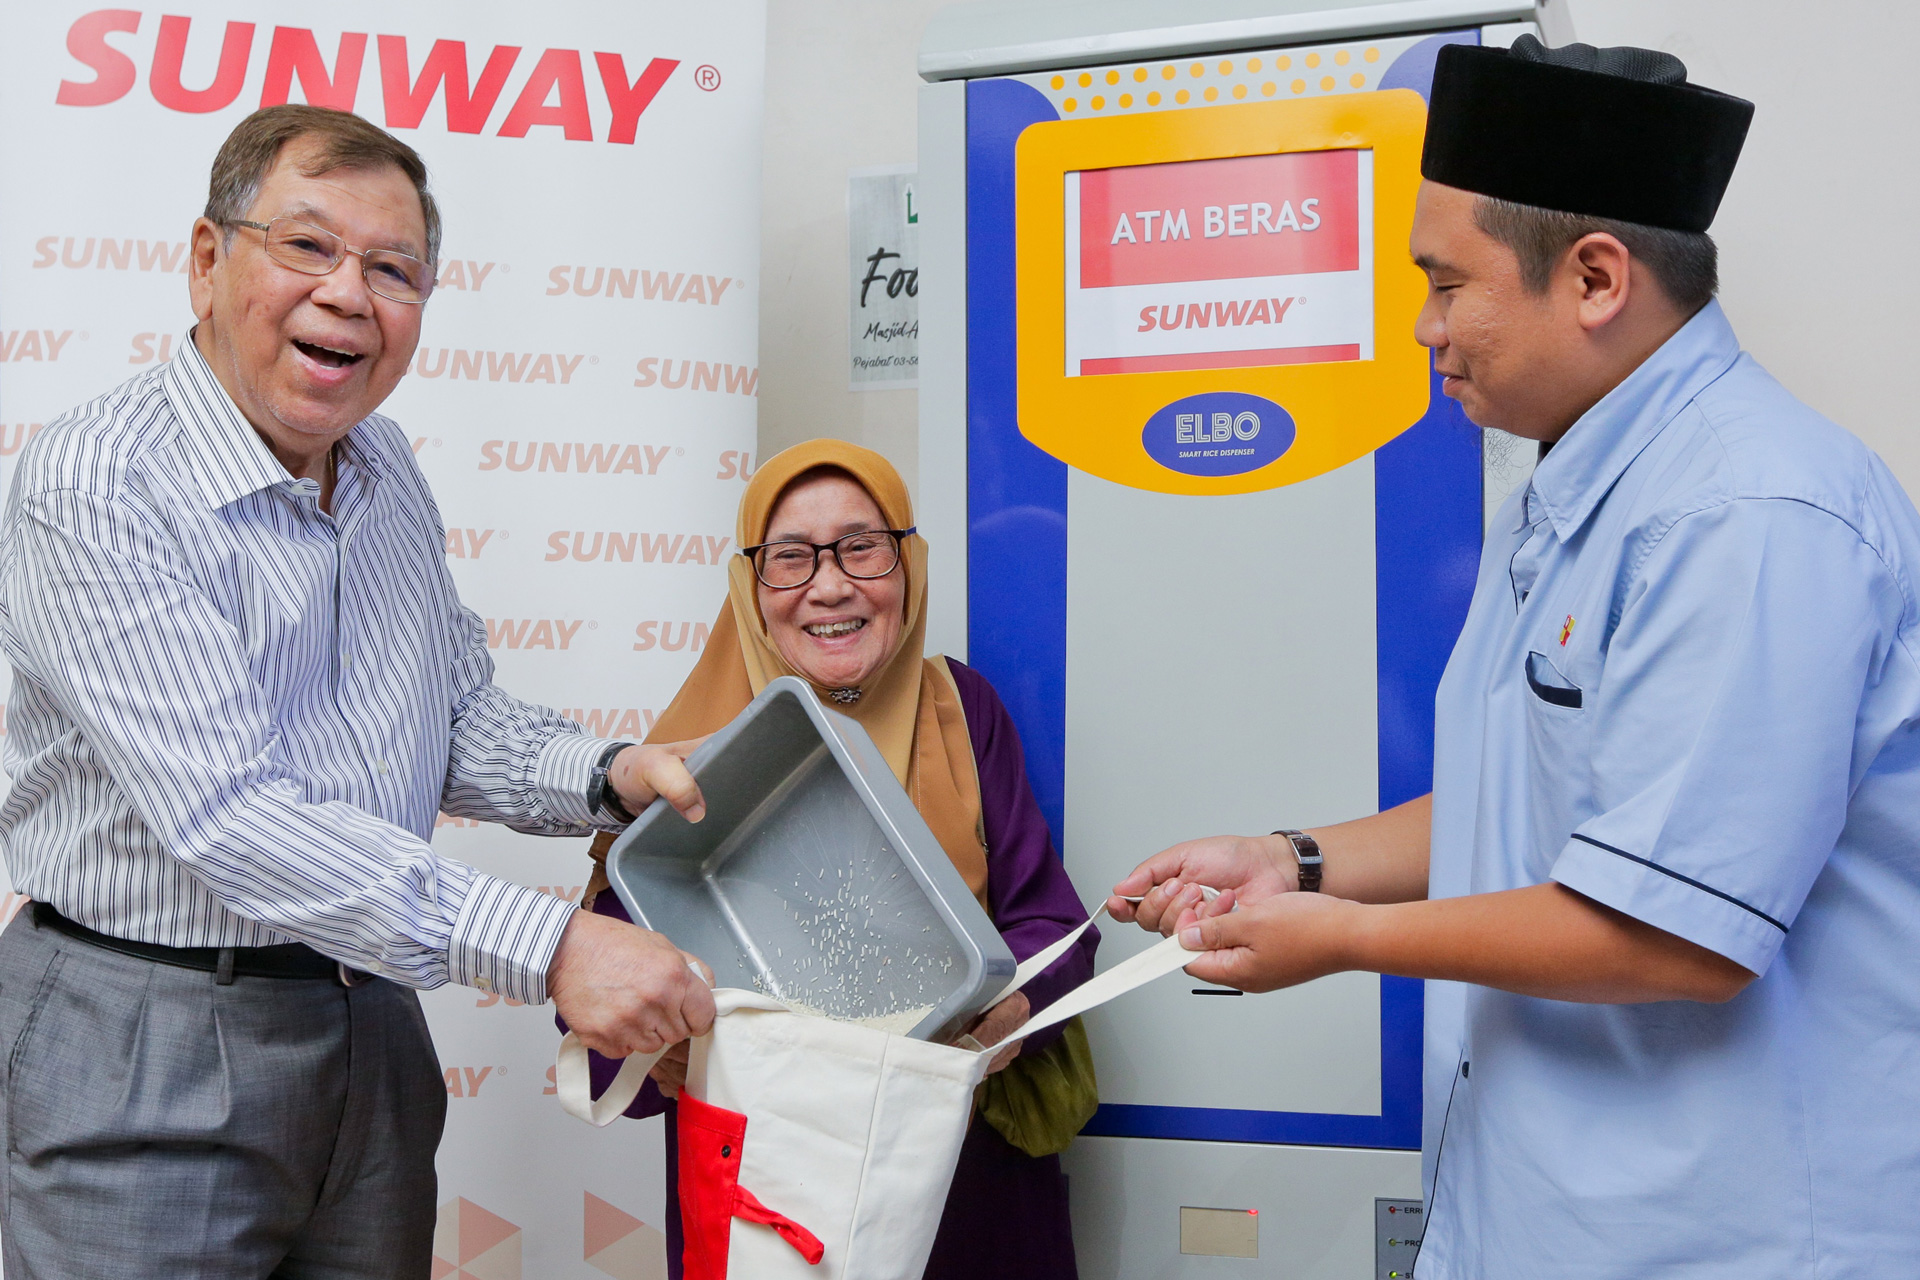 Sunway Presents a Gift of Rice to Its Community